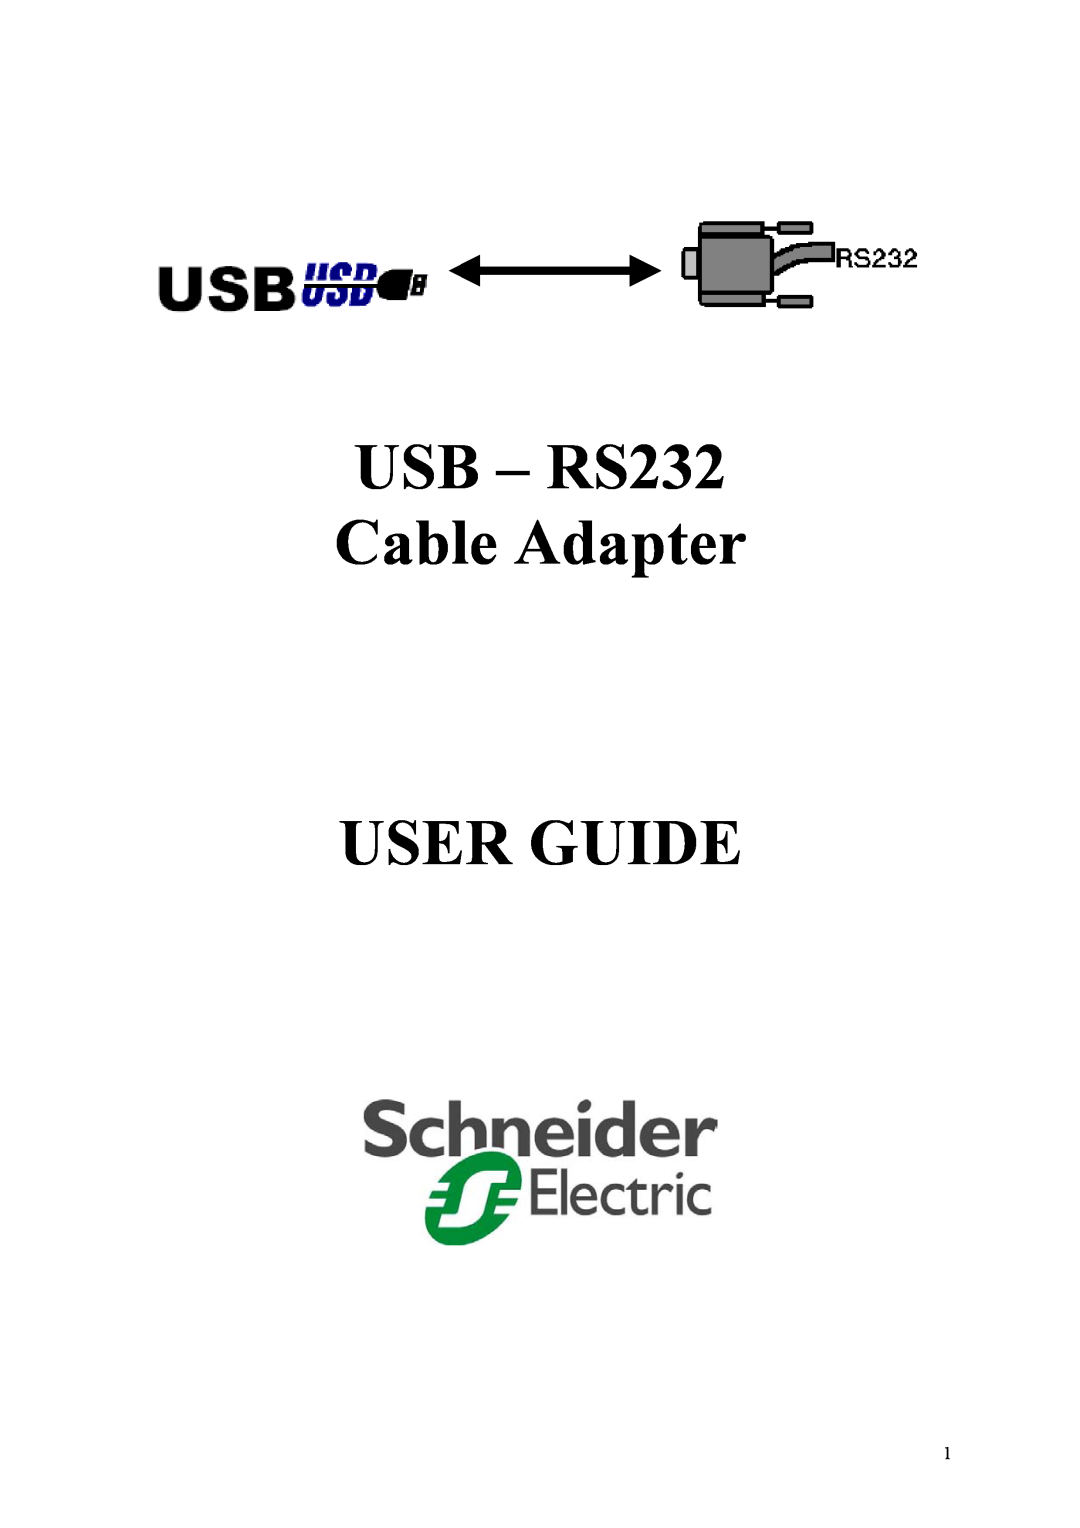 Schneider Electric manual USB - RS232 Cable Adapter USER GUIDE 